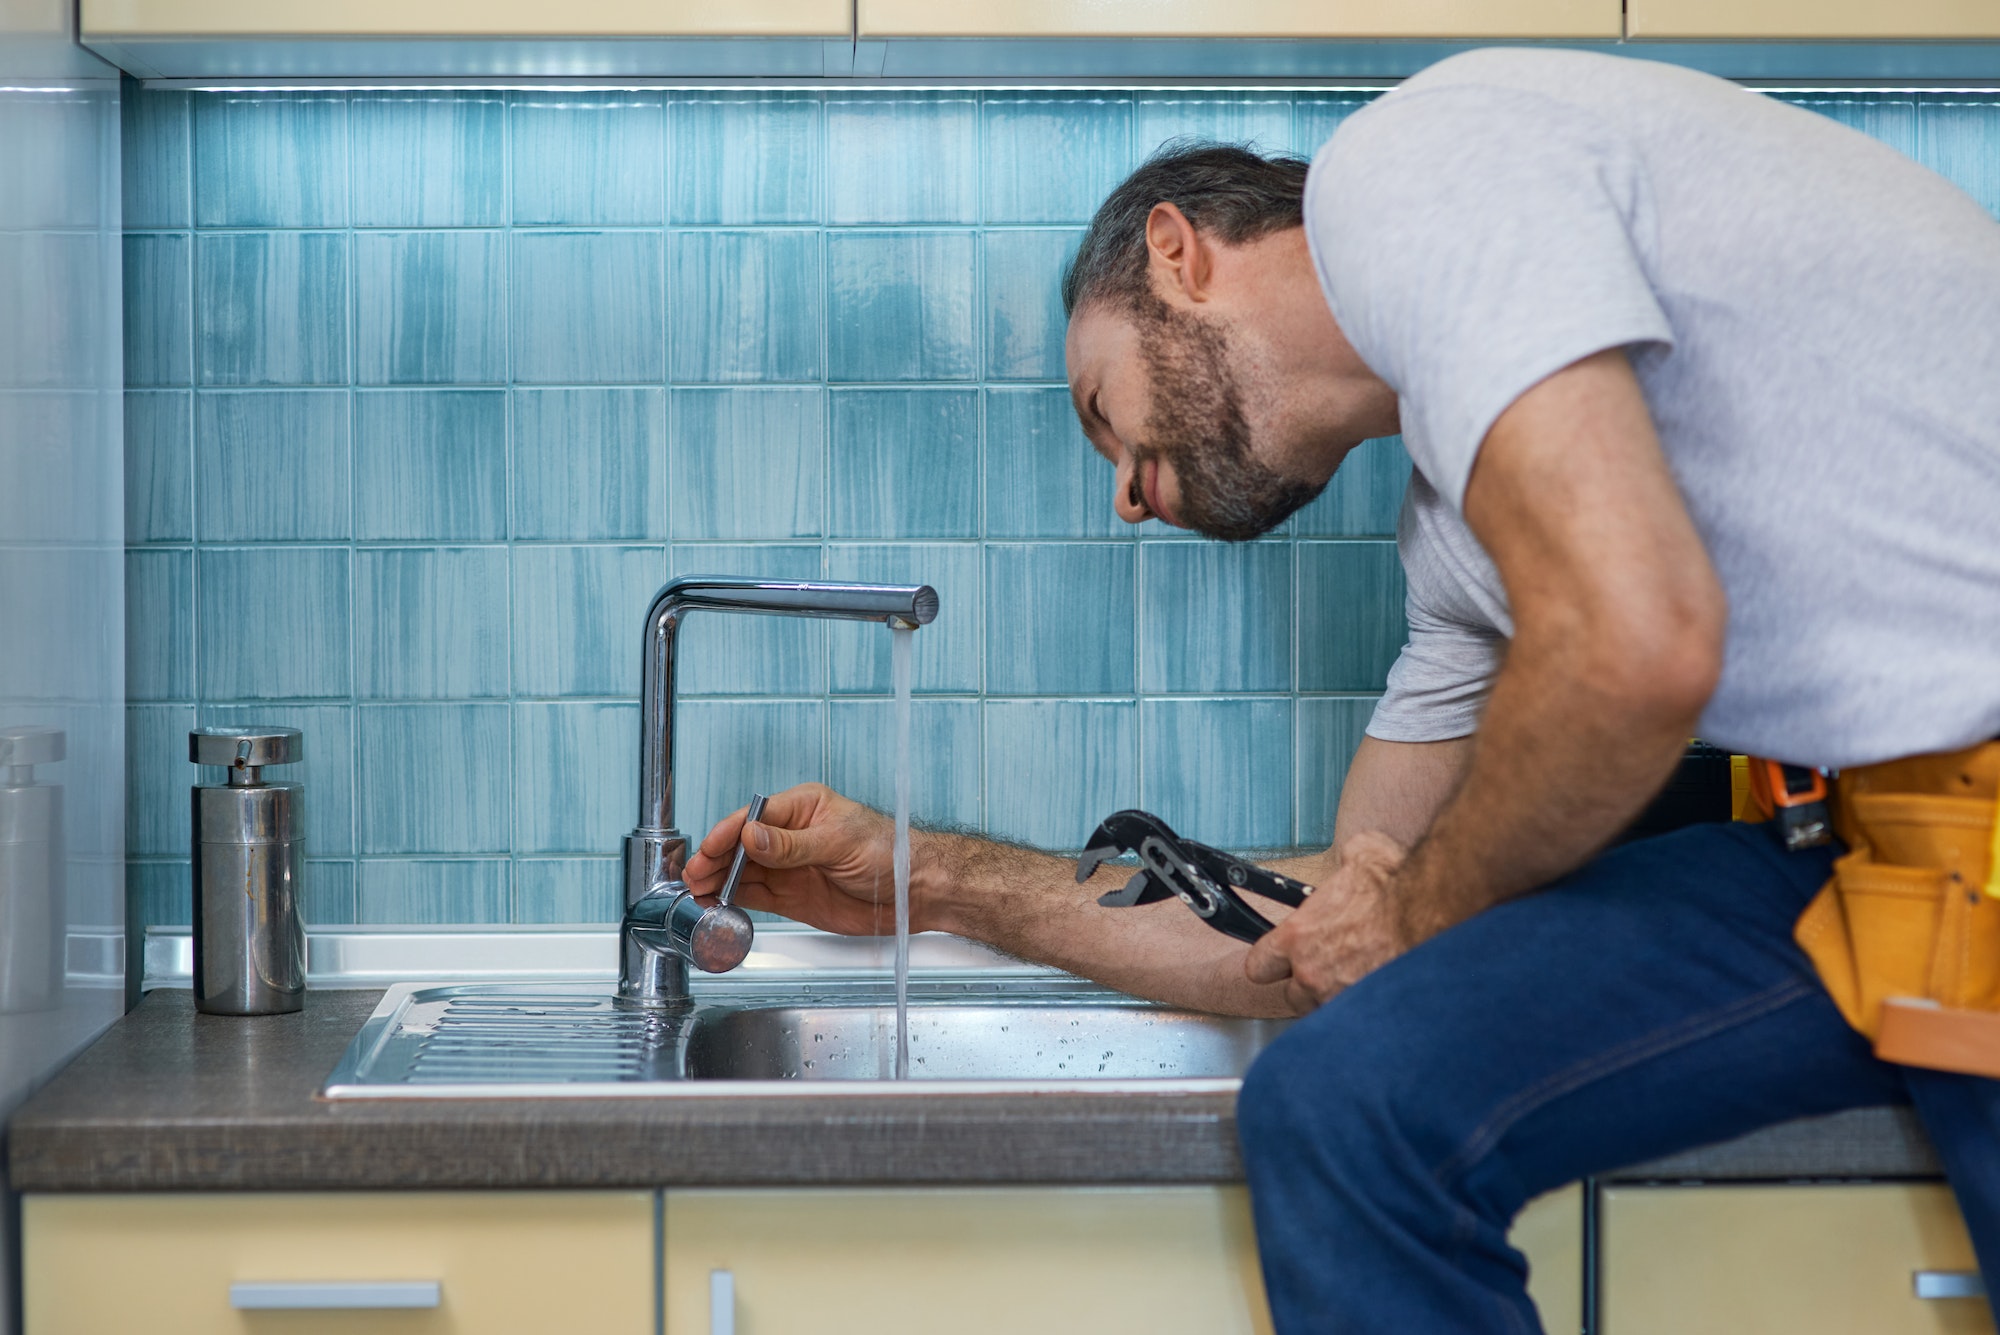 professional plumber looking concentrated using pipe wrench while examining and fixing faucet in